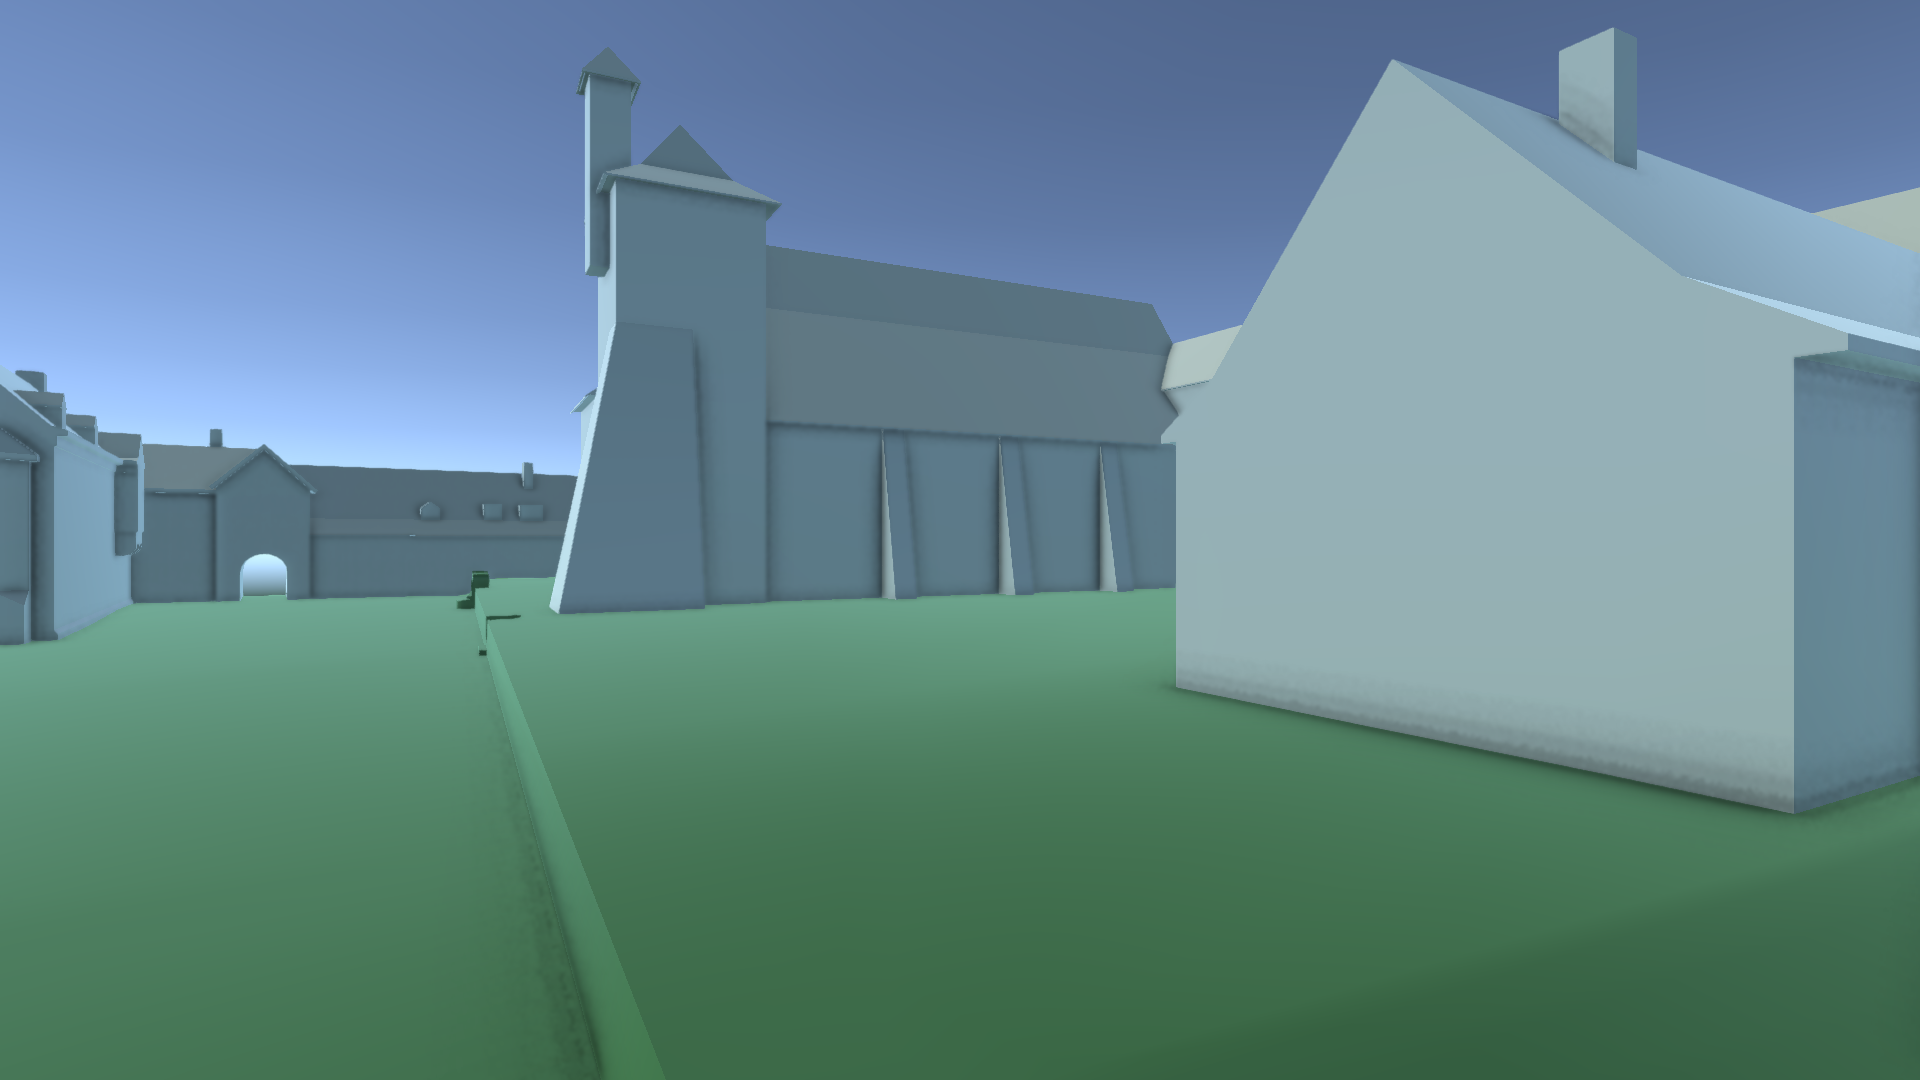 Screenshot of the Ilsenburg Abbey application that shows another angle of the 3D rendered model of the monastery. The camera is at ground level, pointing towards the church. Behind the church the entrance to the monastery grounds through an archway can be seen.